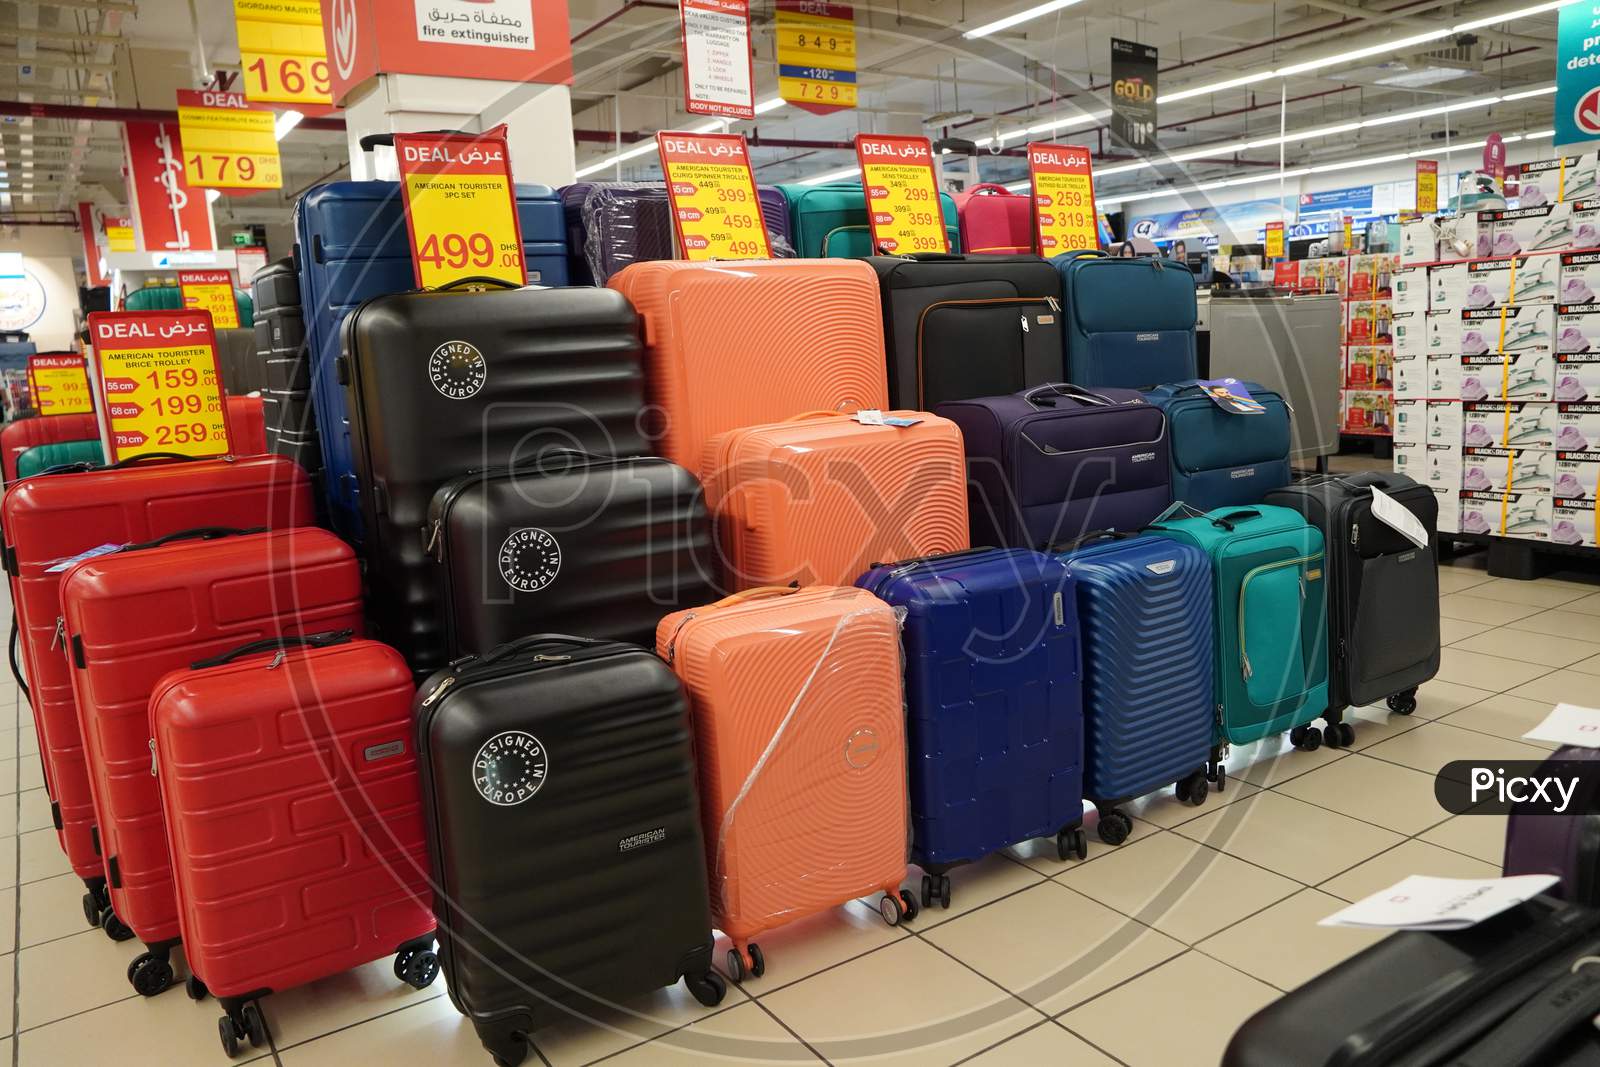 Department Store Interior View With Luggage Zone. Multicolored Suitcases In Store For Sale. Plastic And Cloth Suitcases With Discount Tags. Concept Of Black Friday Discounts.